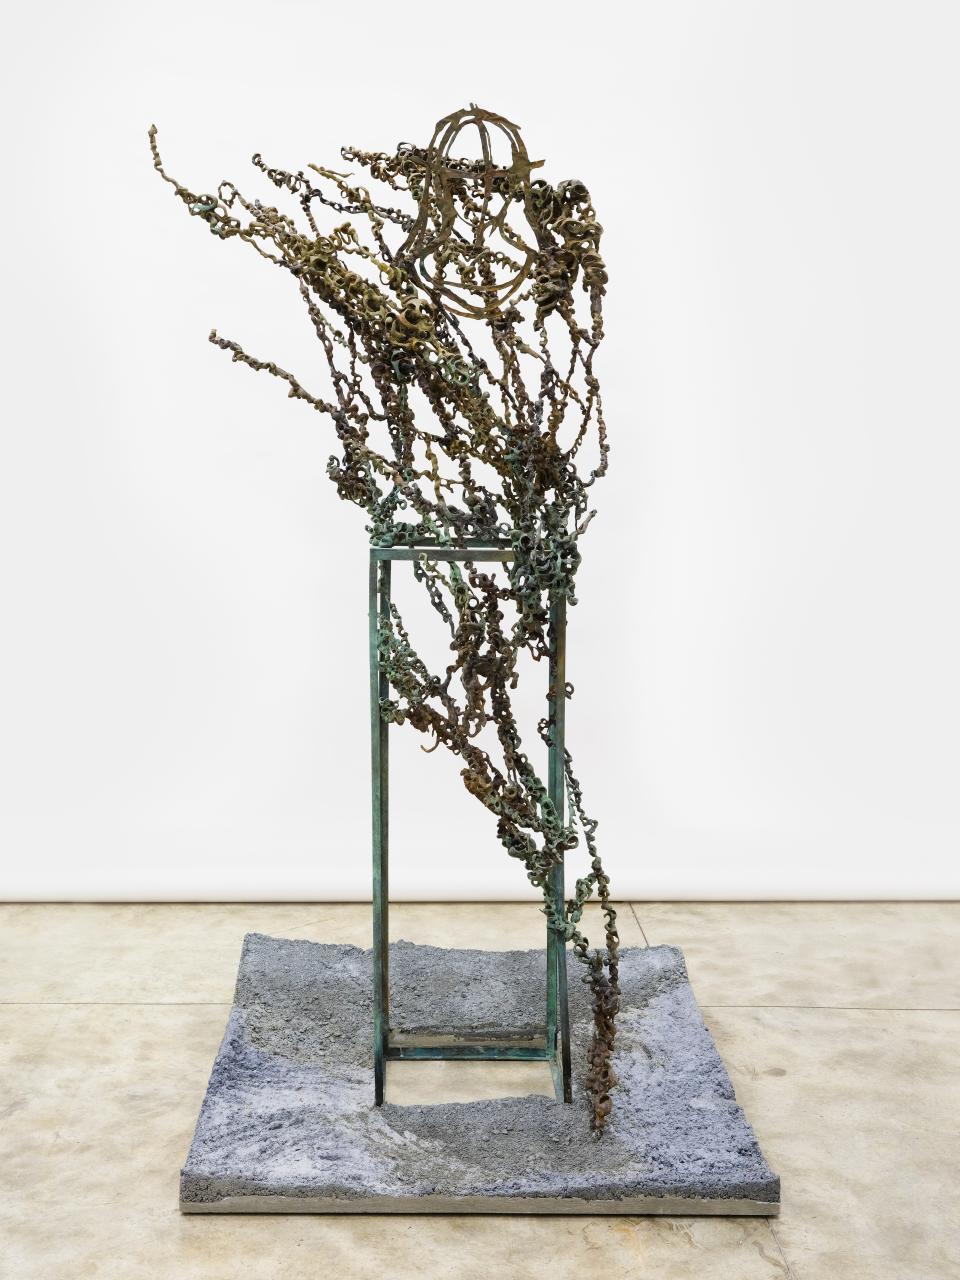 “Seed,” a 2003 bronze and concrete sculpture by Diana Al-Hadid is among the past Hermitage Artist Retreat fellows whose work is featured in the Sarasota Art Museum exhibit “Impact: Contemporary Artists at the Hermitage Artist Retreat.”